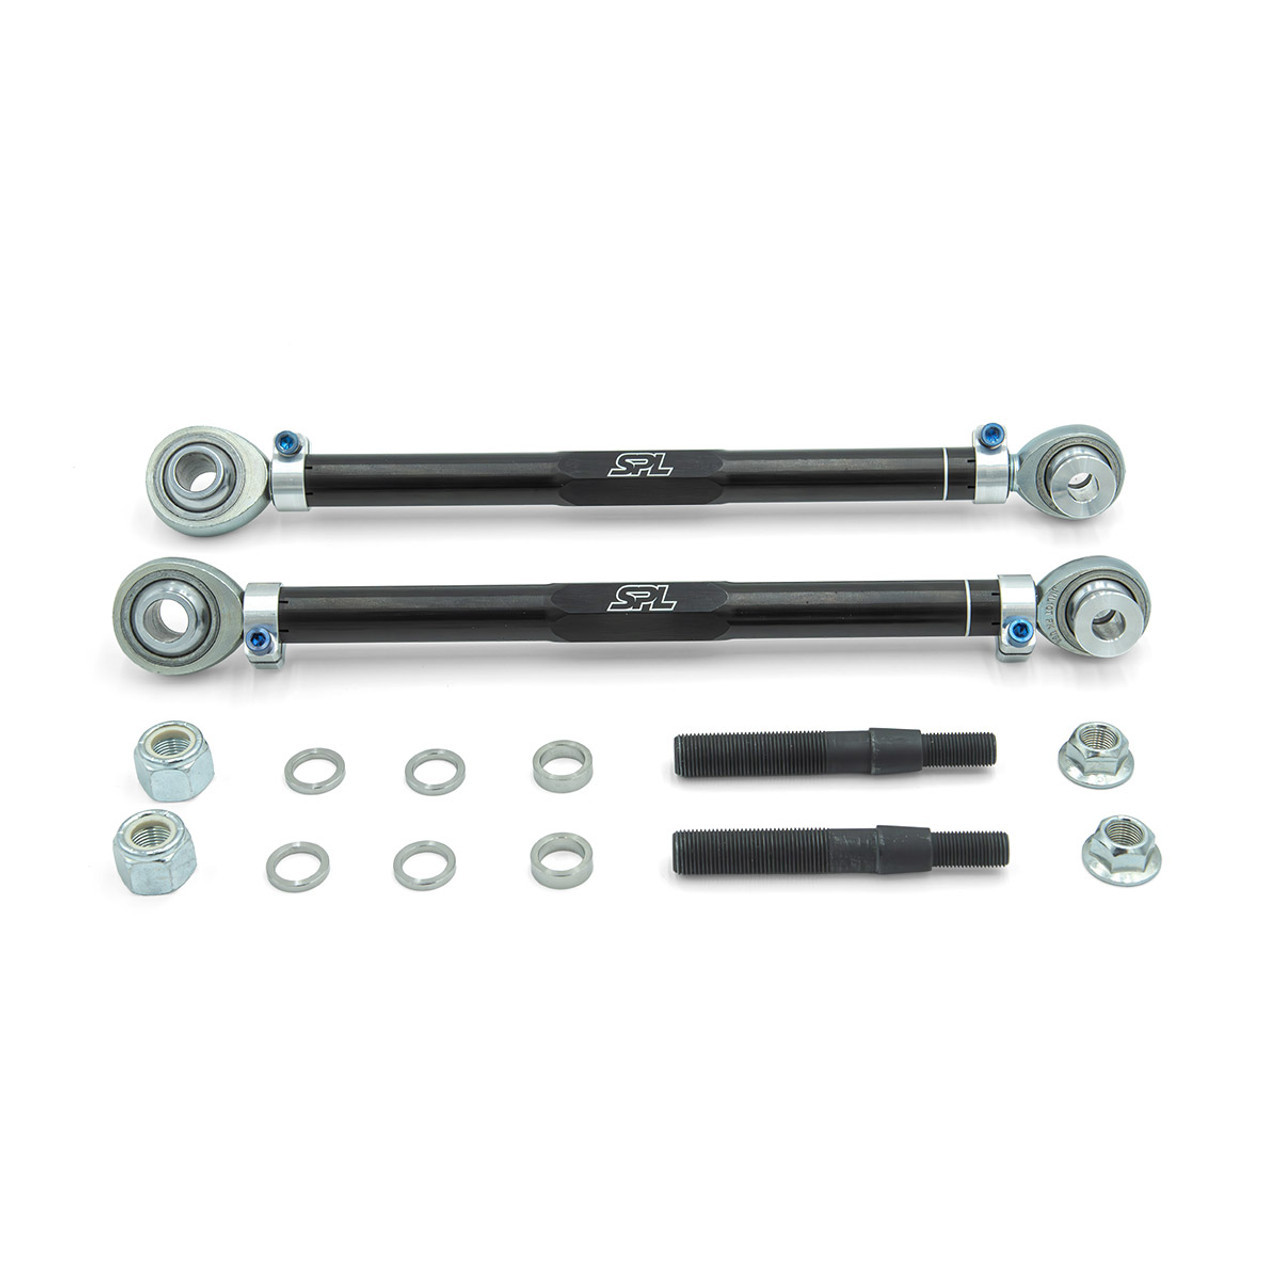 SPL Parts Adjustable Rear Toe Links with Eccentric Lockouts for Porsche 996 & 997